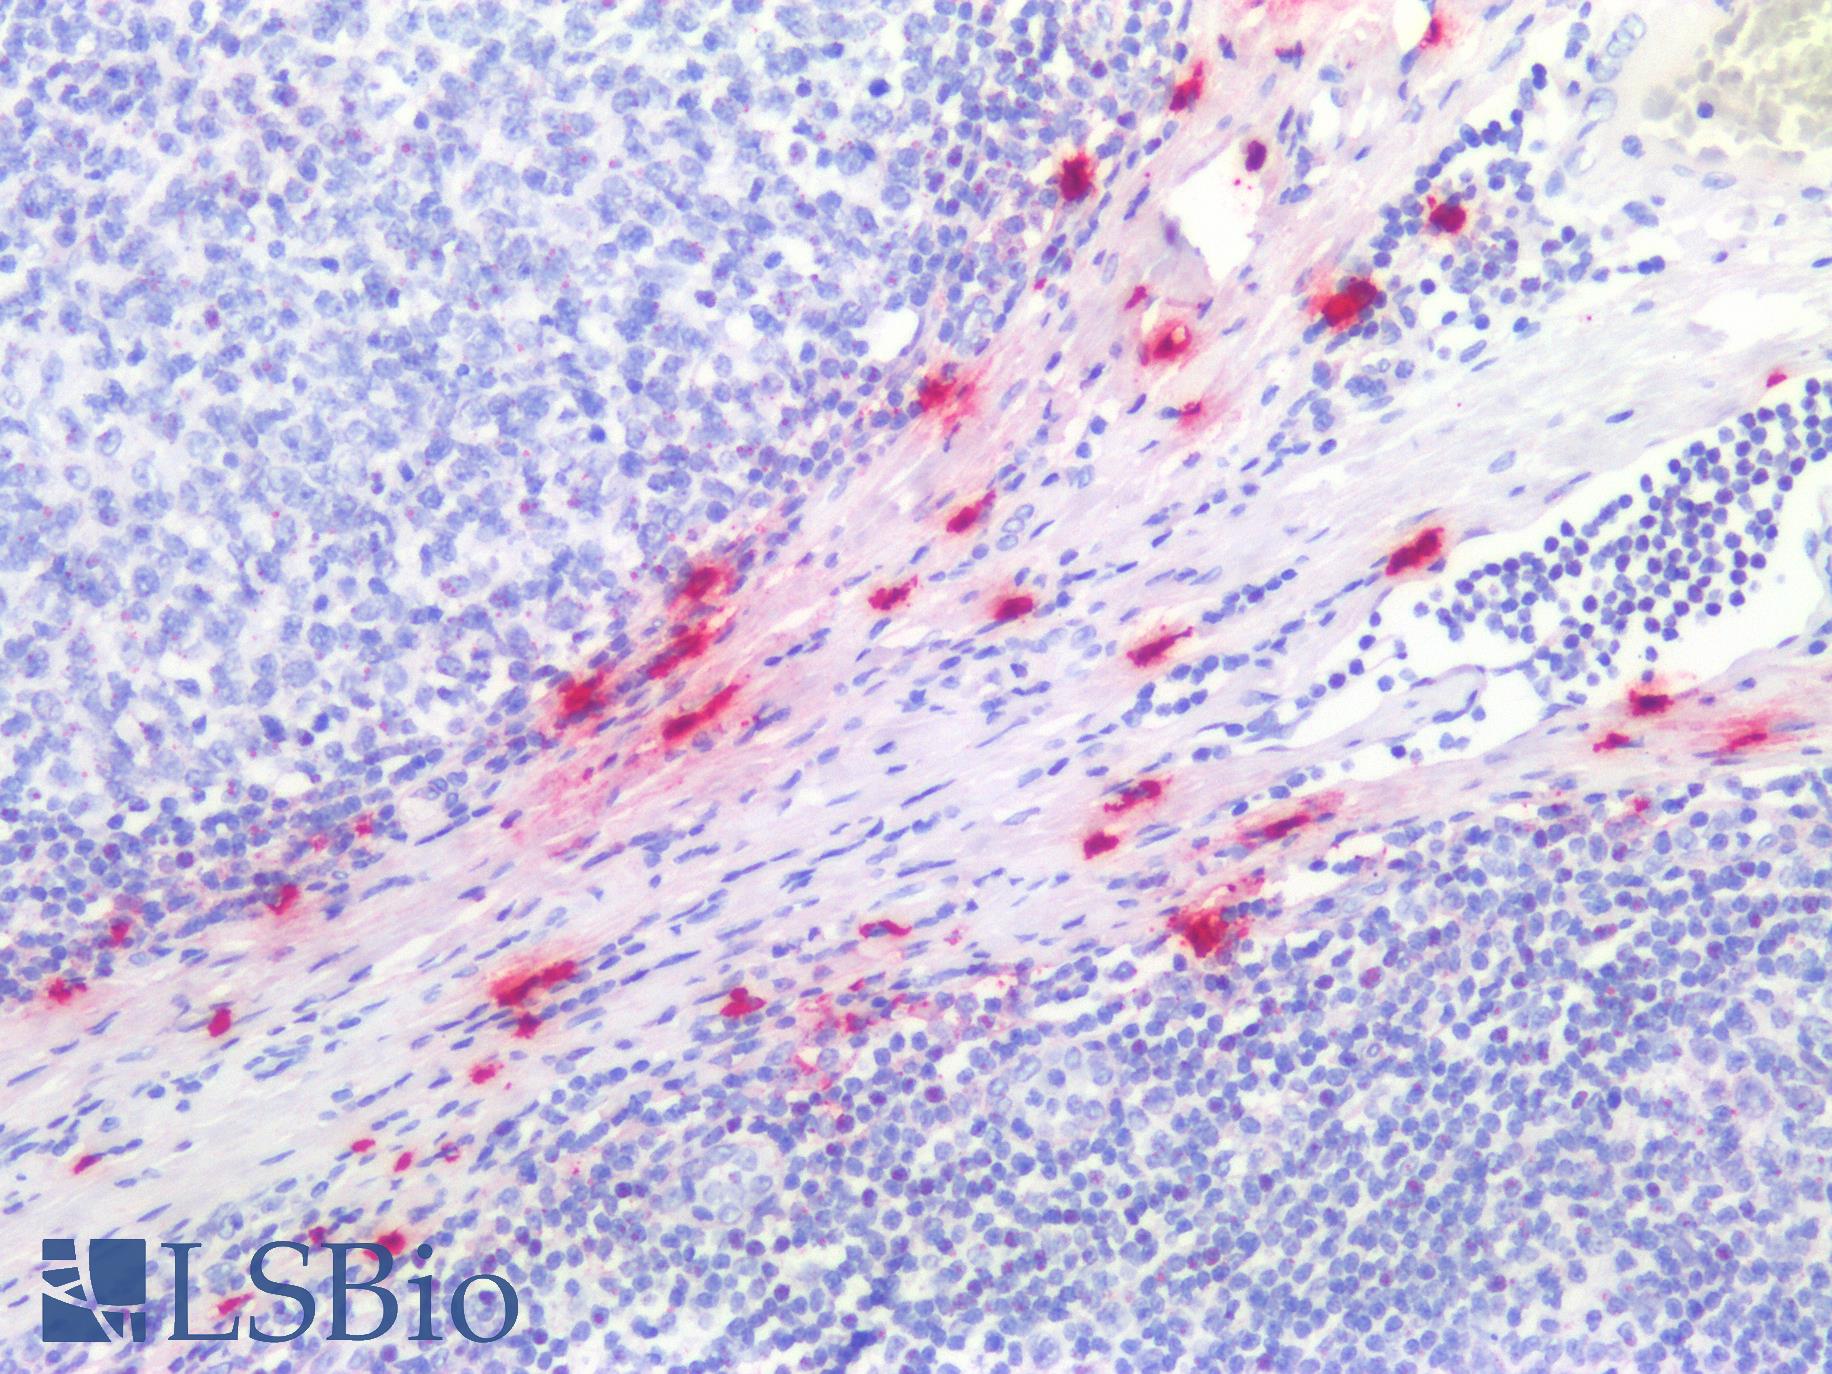 TPSAB1 / Mast Cell Tryptase Antibody - Human Tonsil, Mast Cells: Formalin-Fixed, Paraffin-Embedded (FFPE)